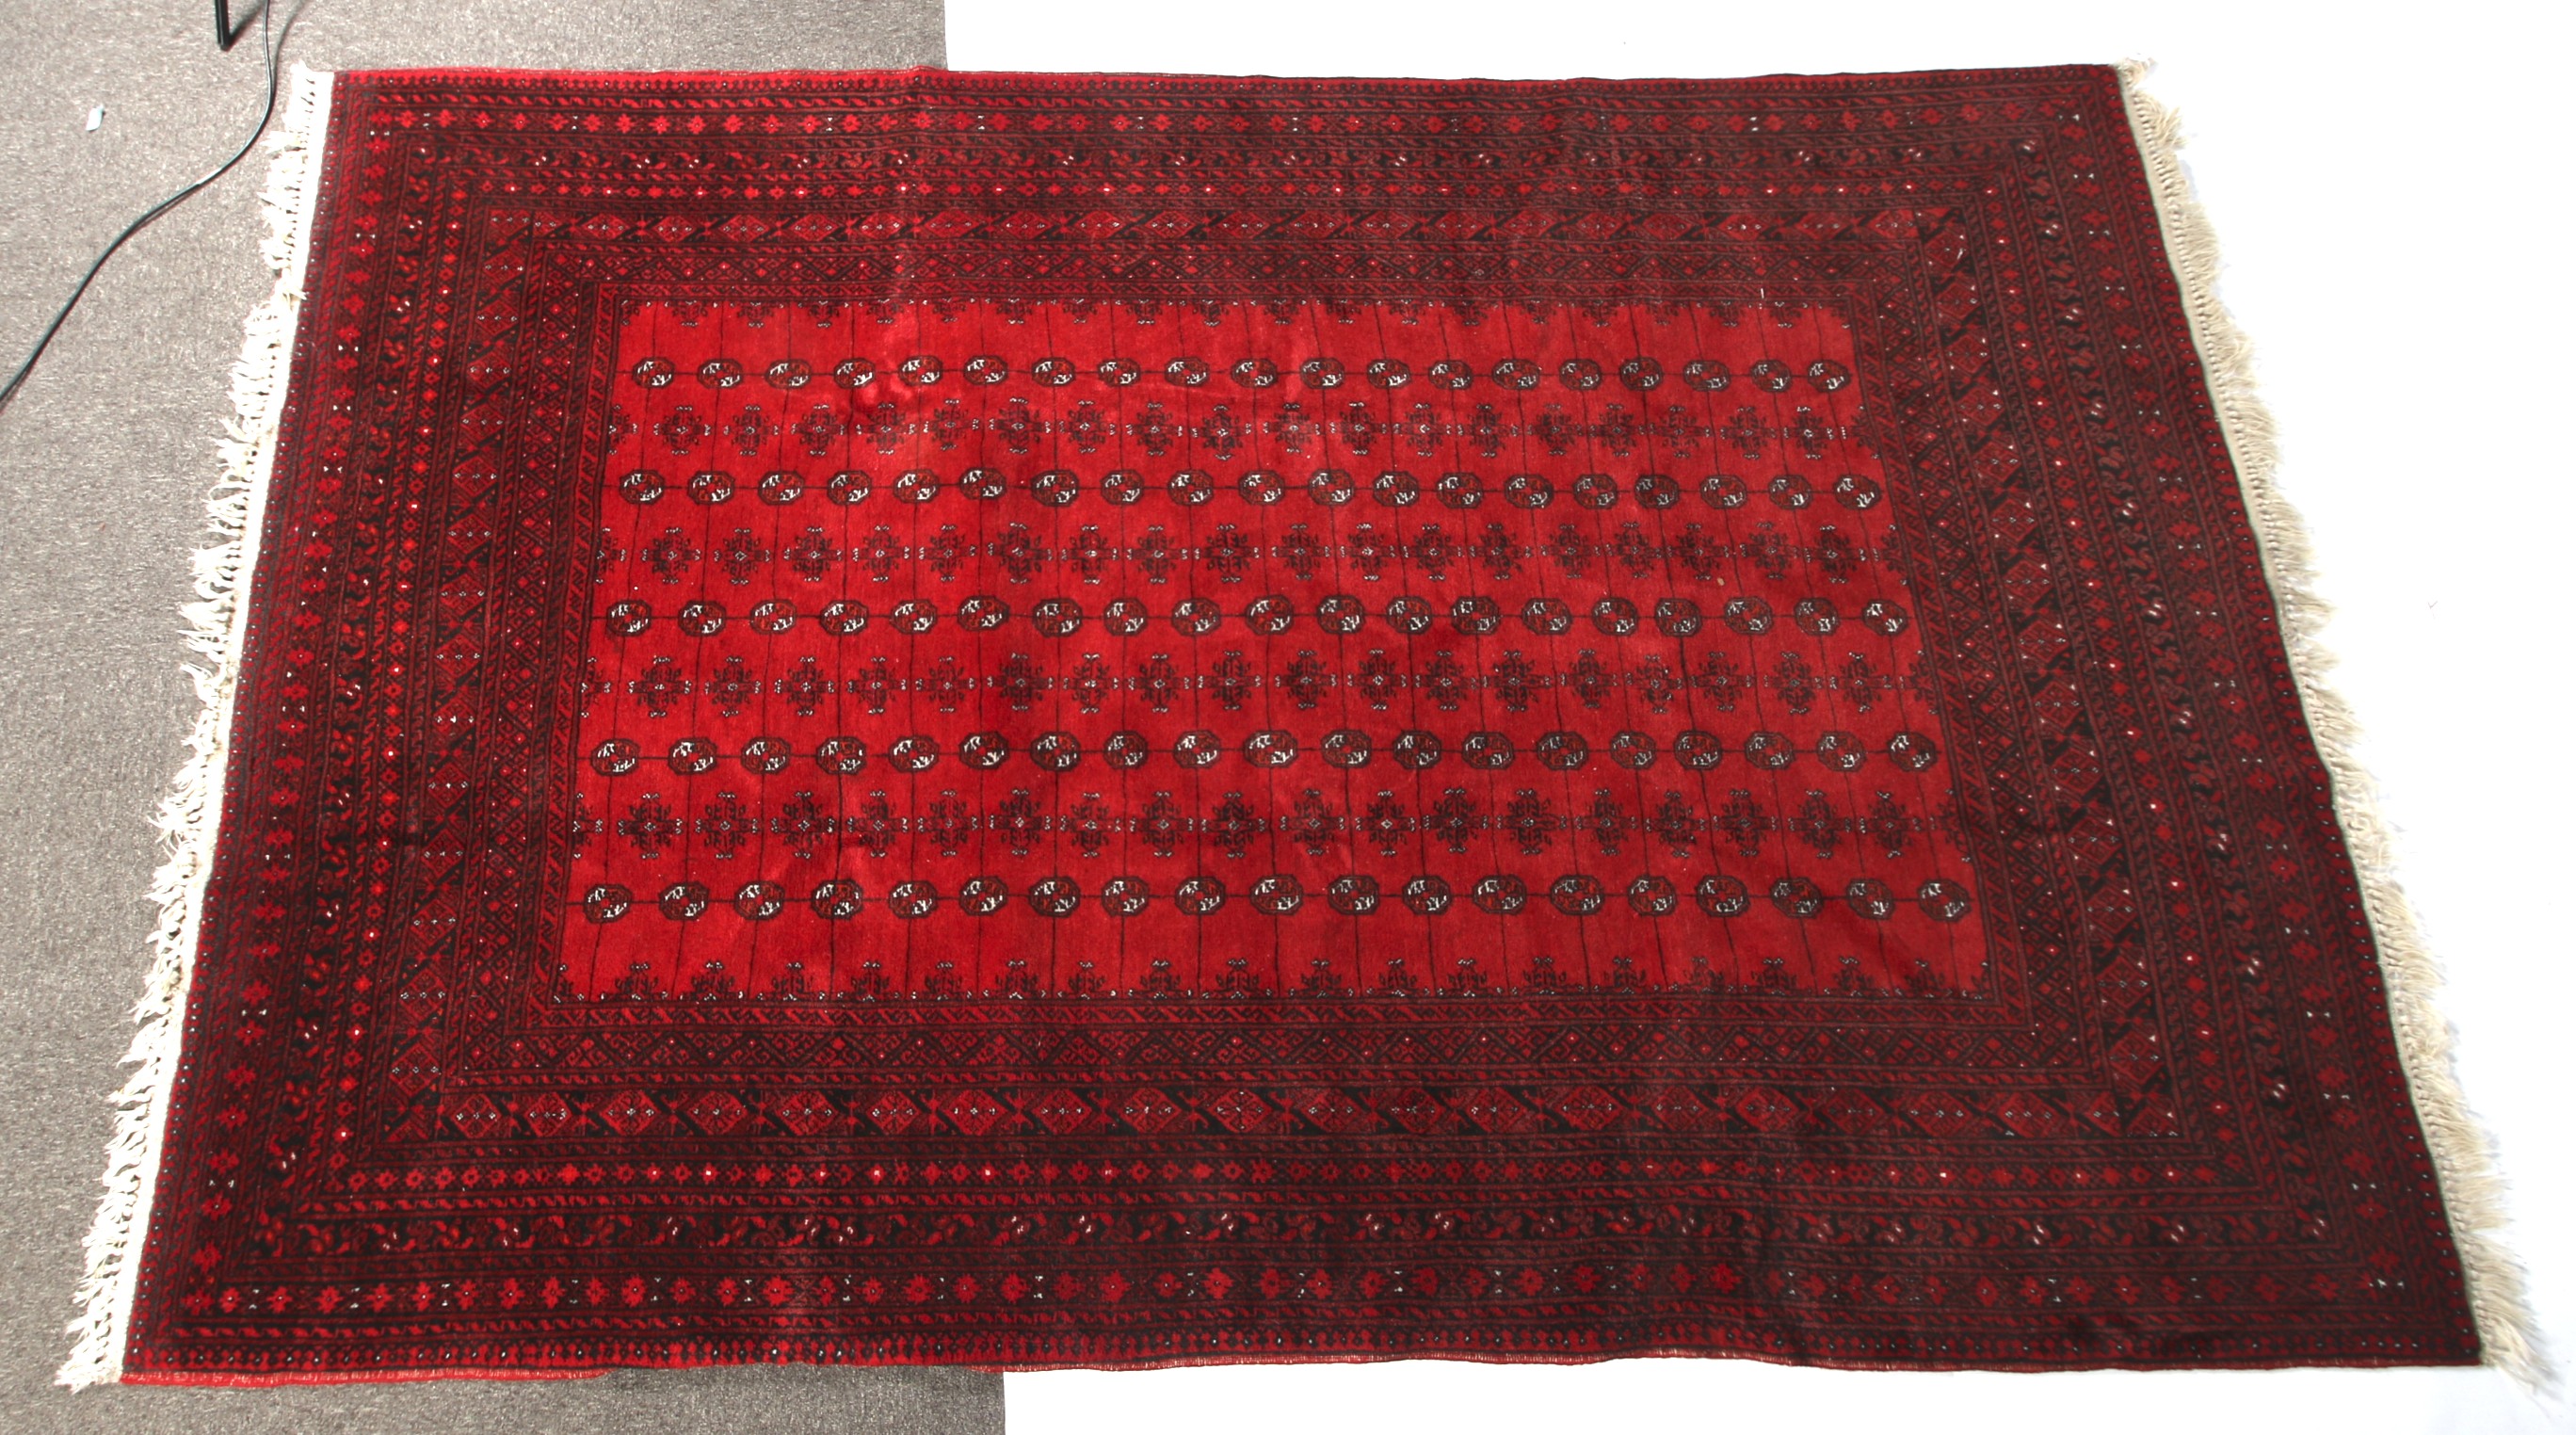 A large 20th century Bokhara Persian style red wool carpet rug.